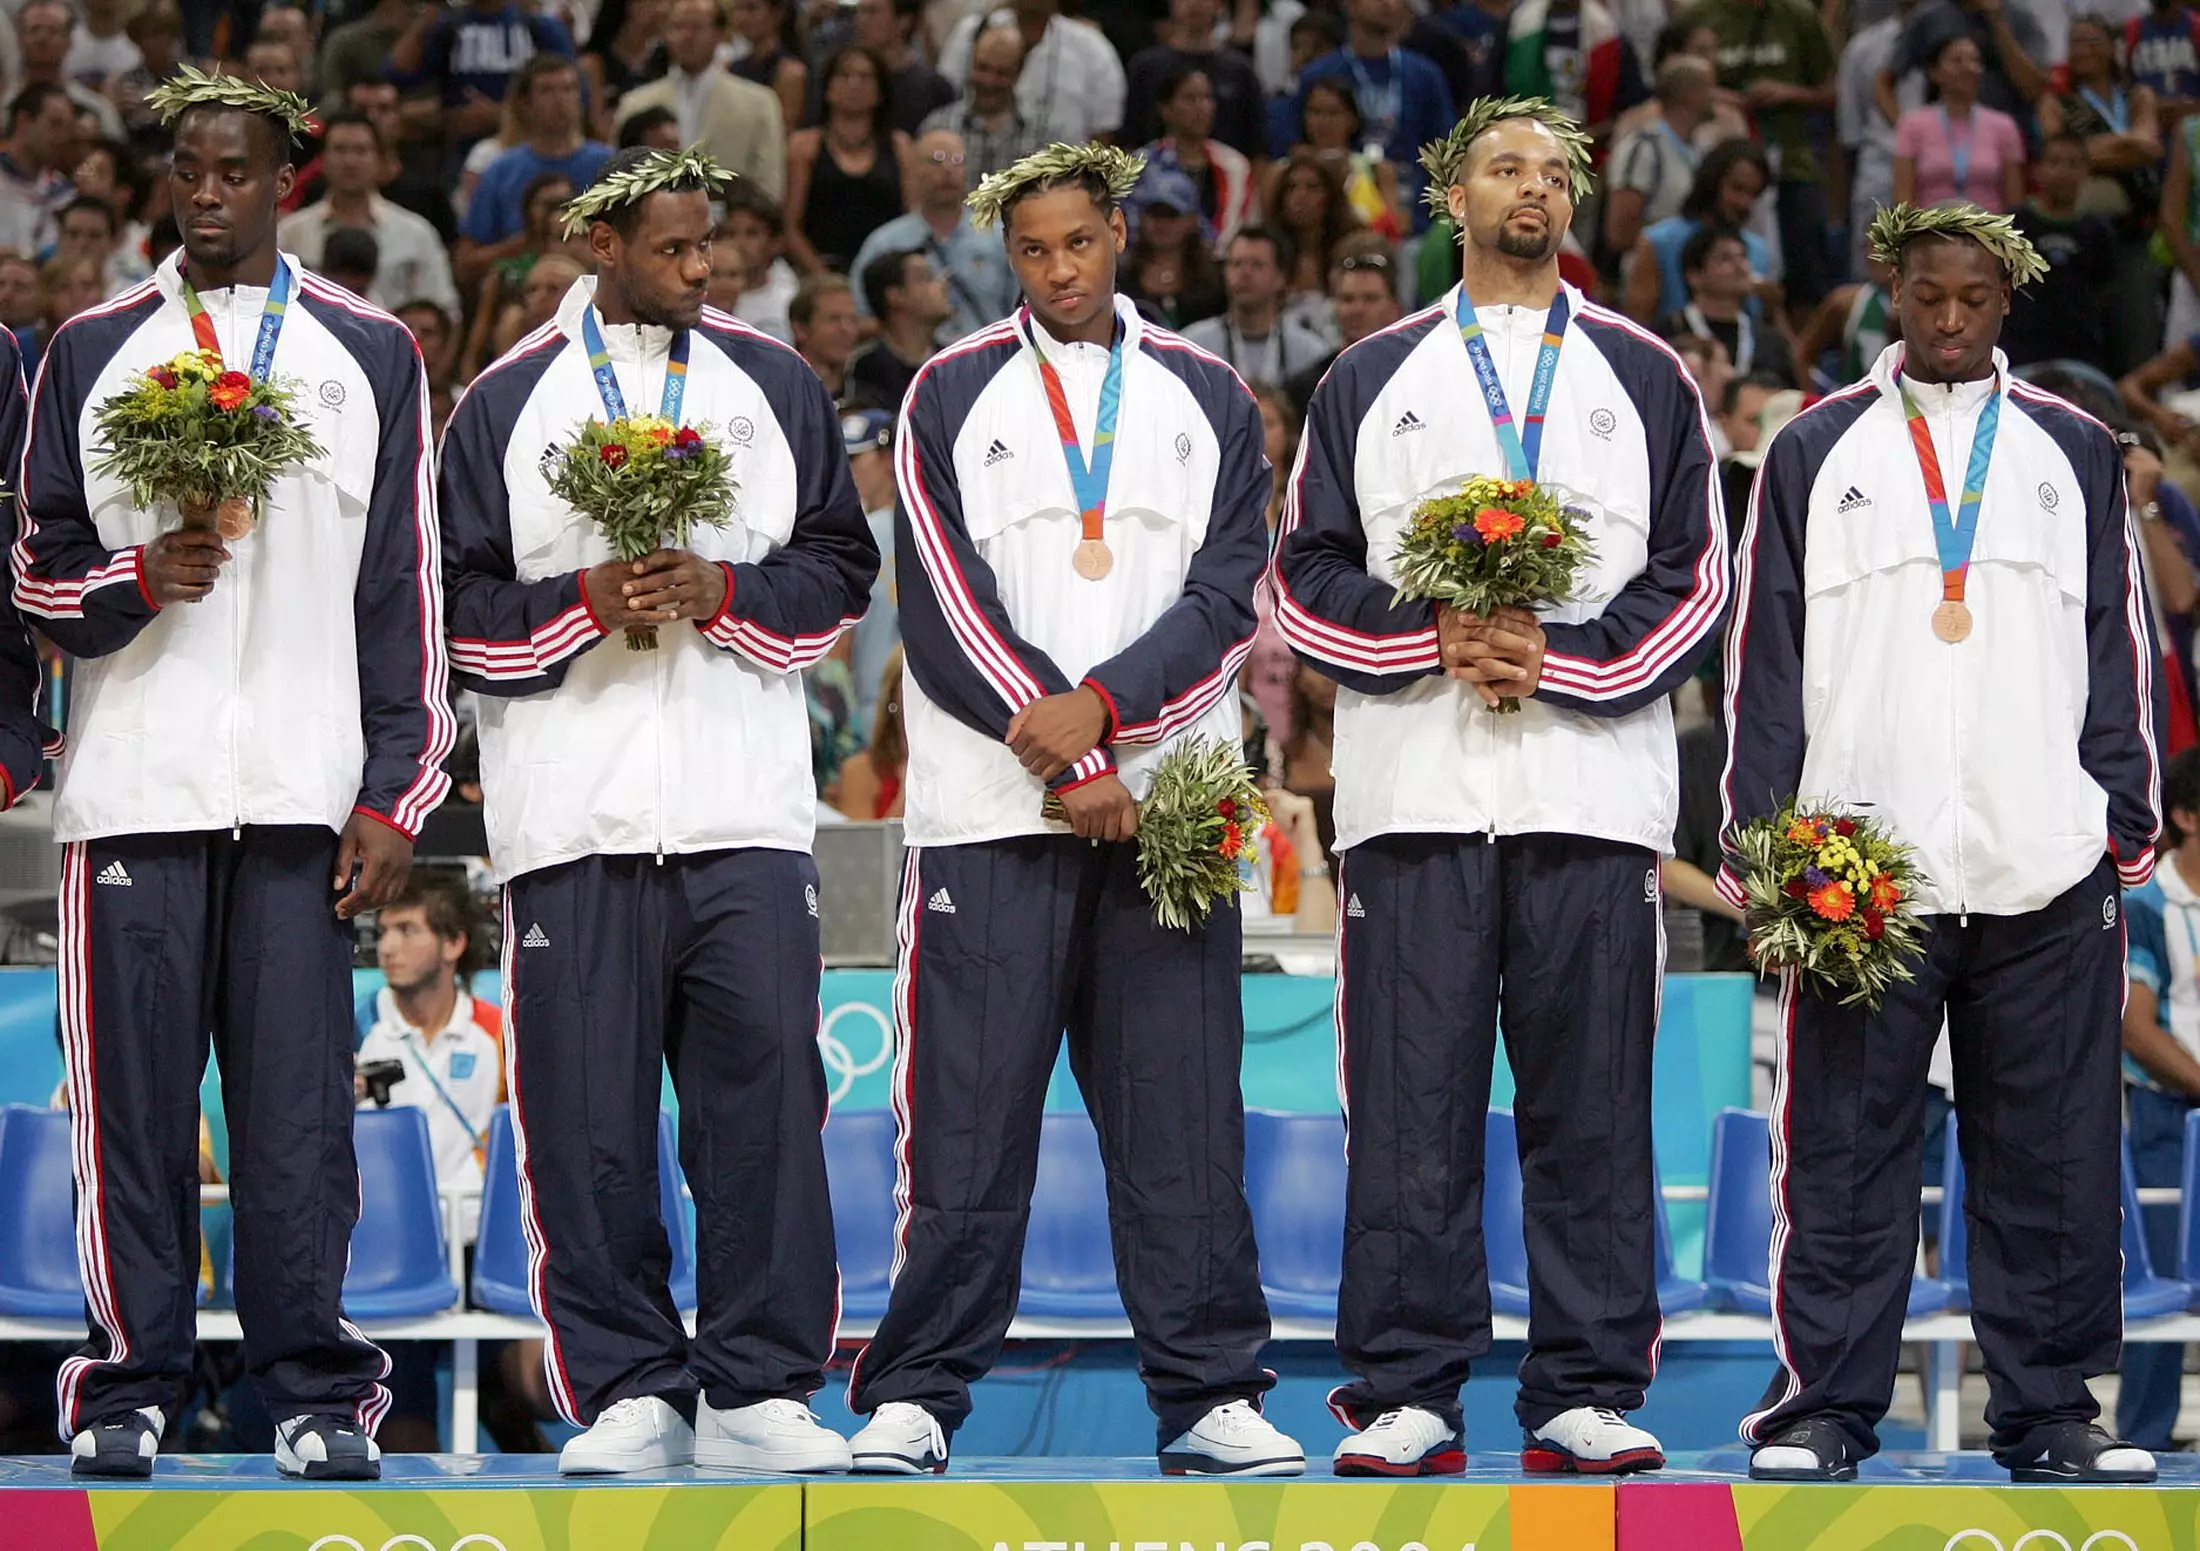 Team USA looked buzzing with their bronze medals.